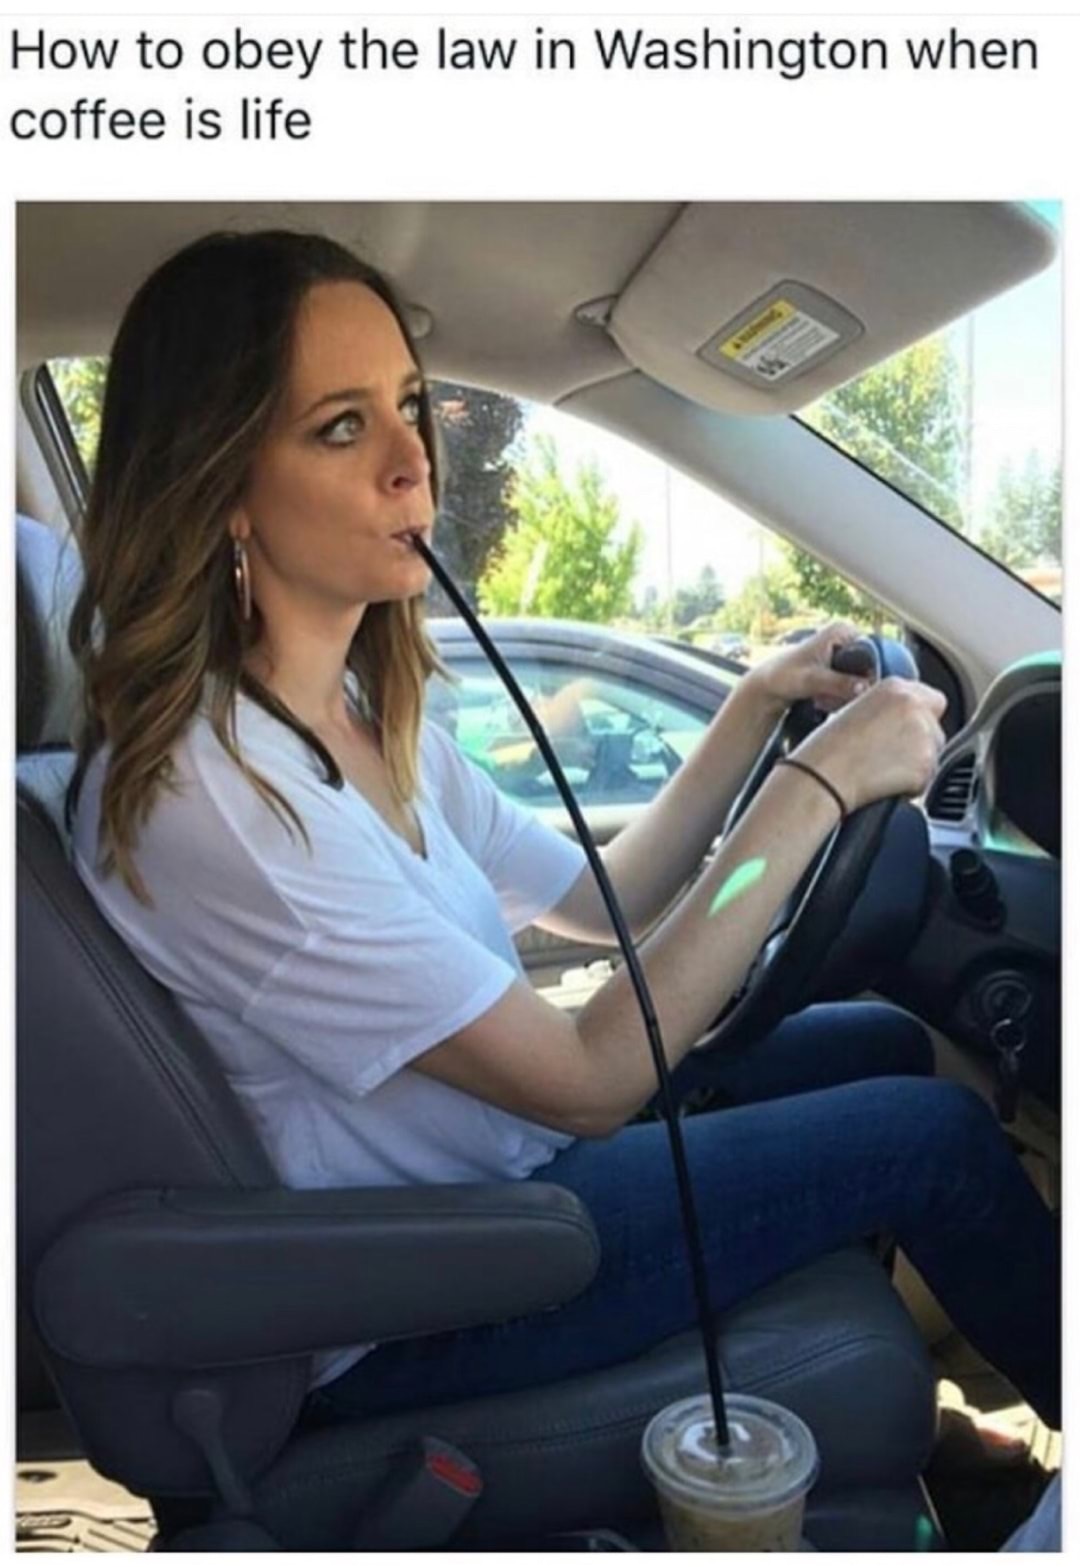 distracted driving meme - How to obey the law in Washington when coffee is life